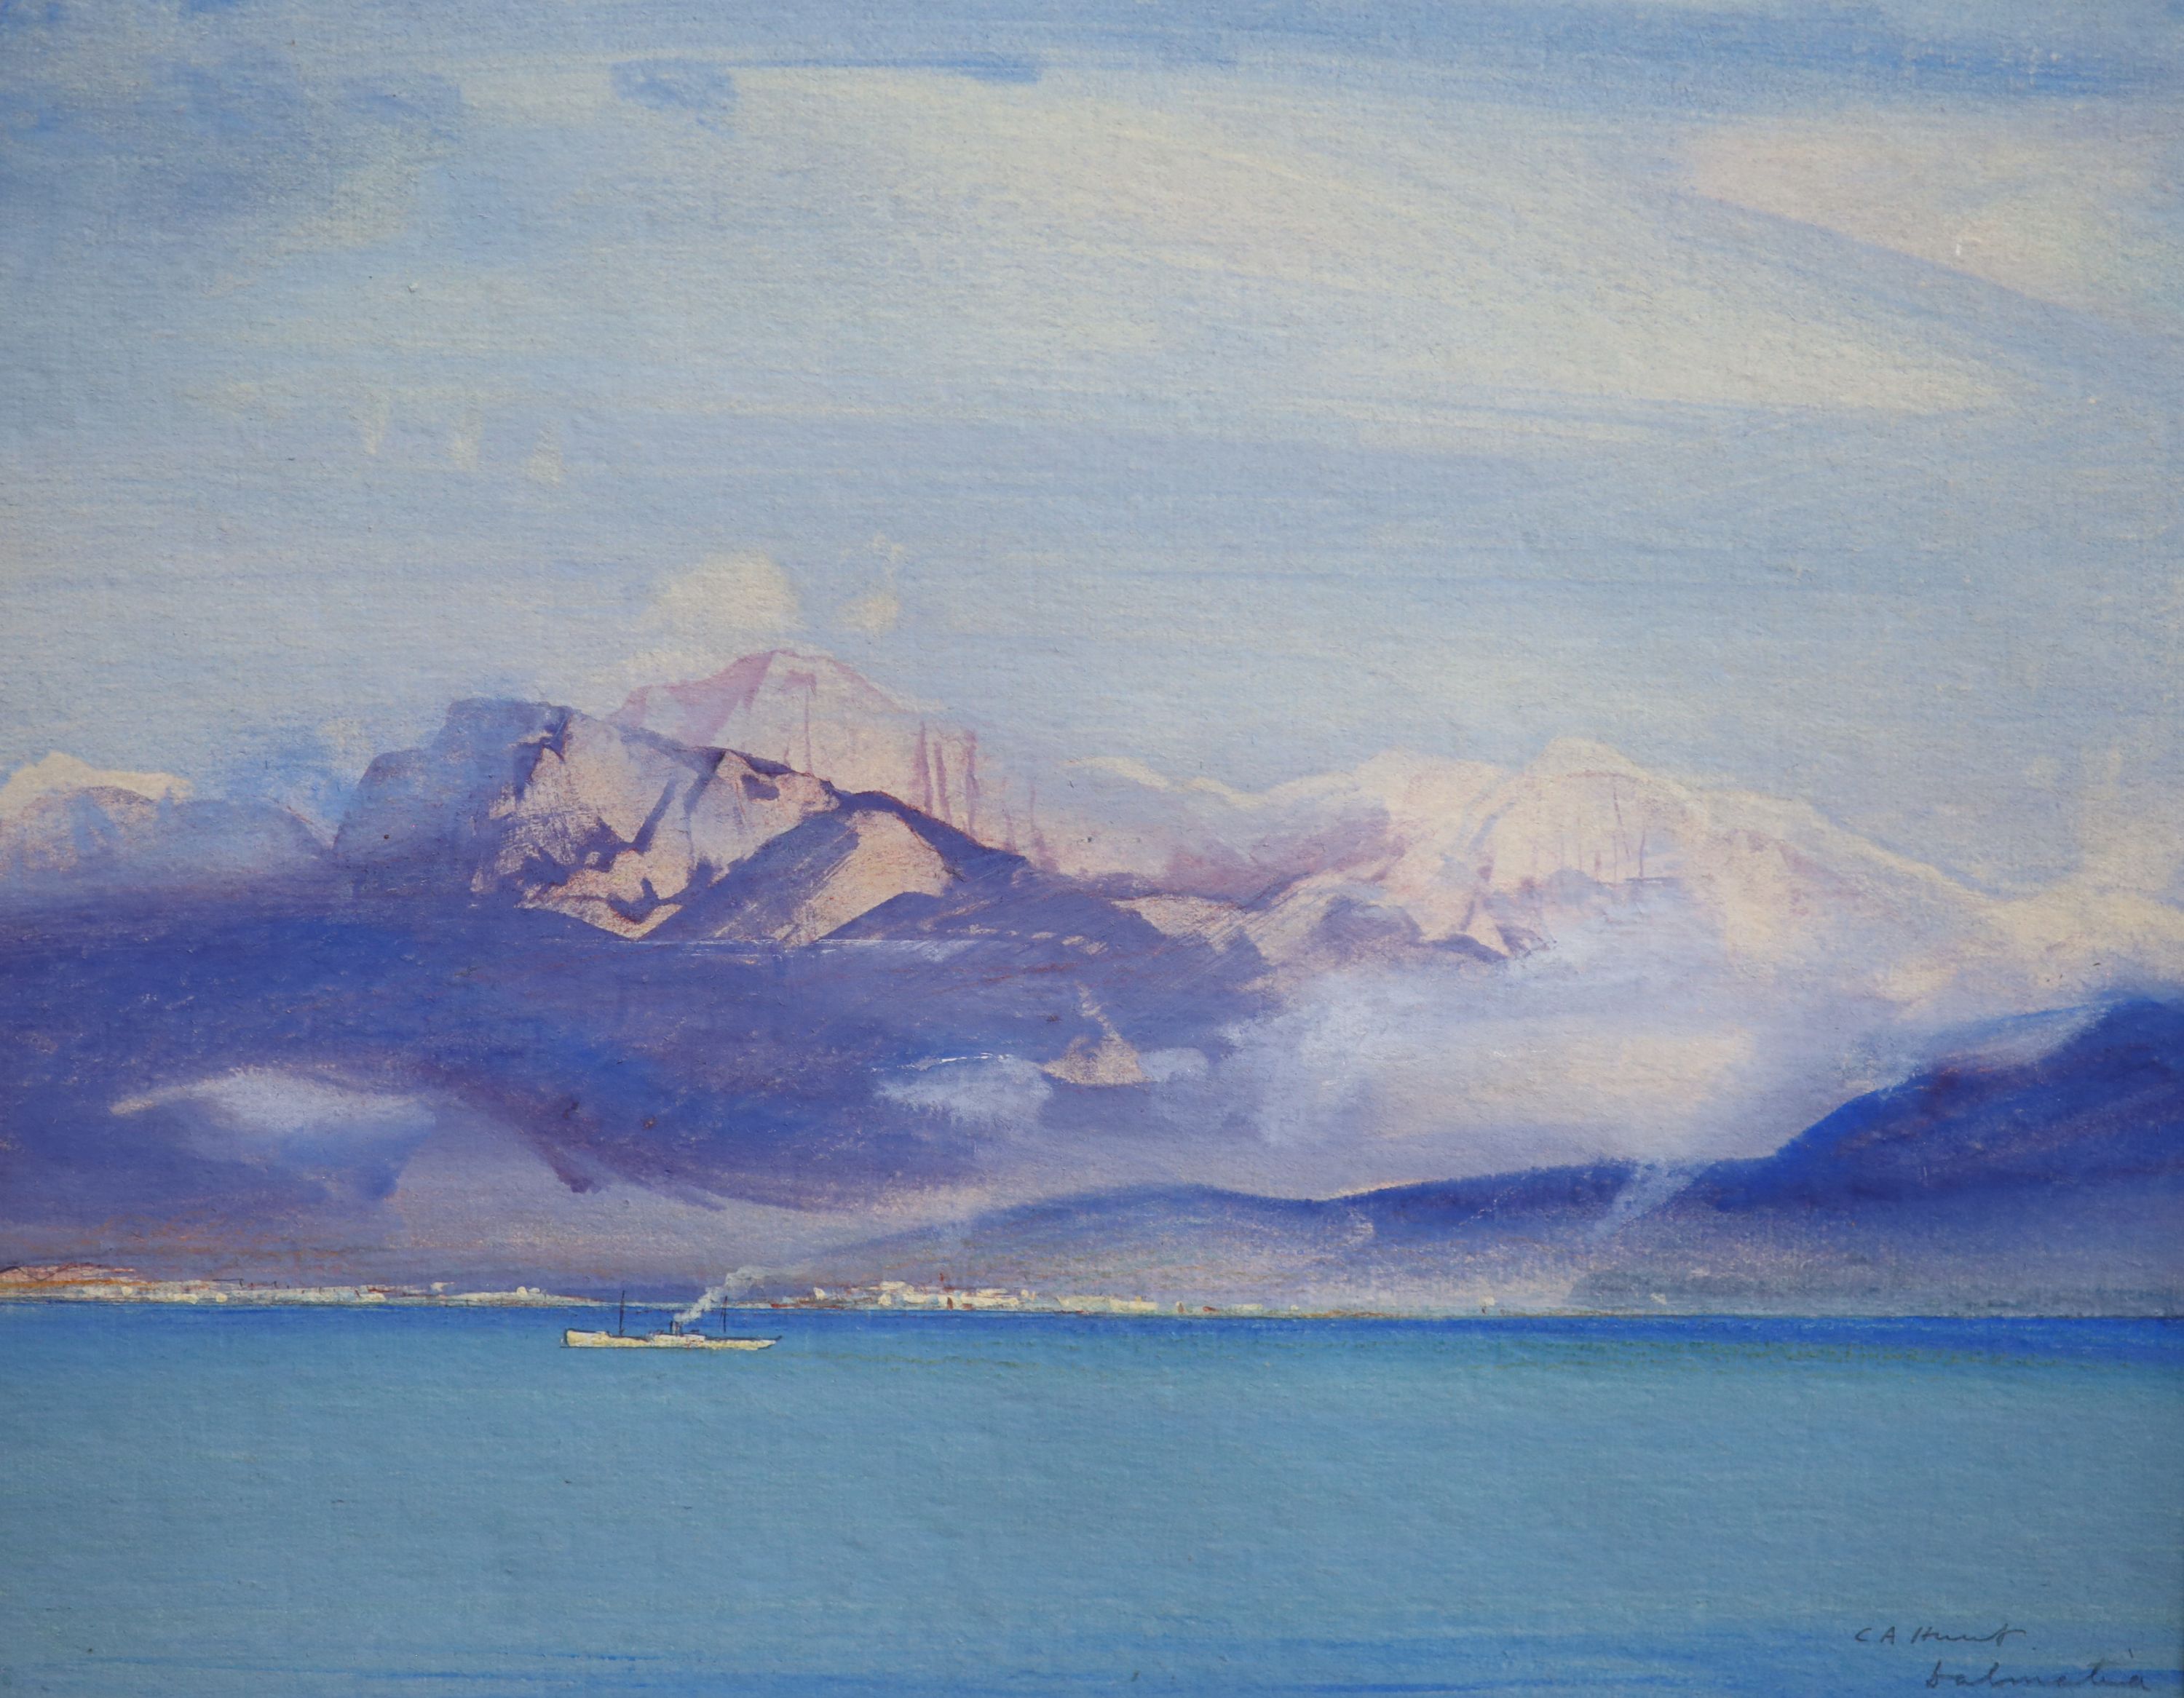 Cecil Arthur Hunt, V.P.R.W.S, R.B.A. (1873-1965), 'View of The Dalmatian Coast', gouache and watercolour on paper, 24 x 31 cm, unframed